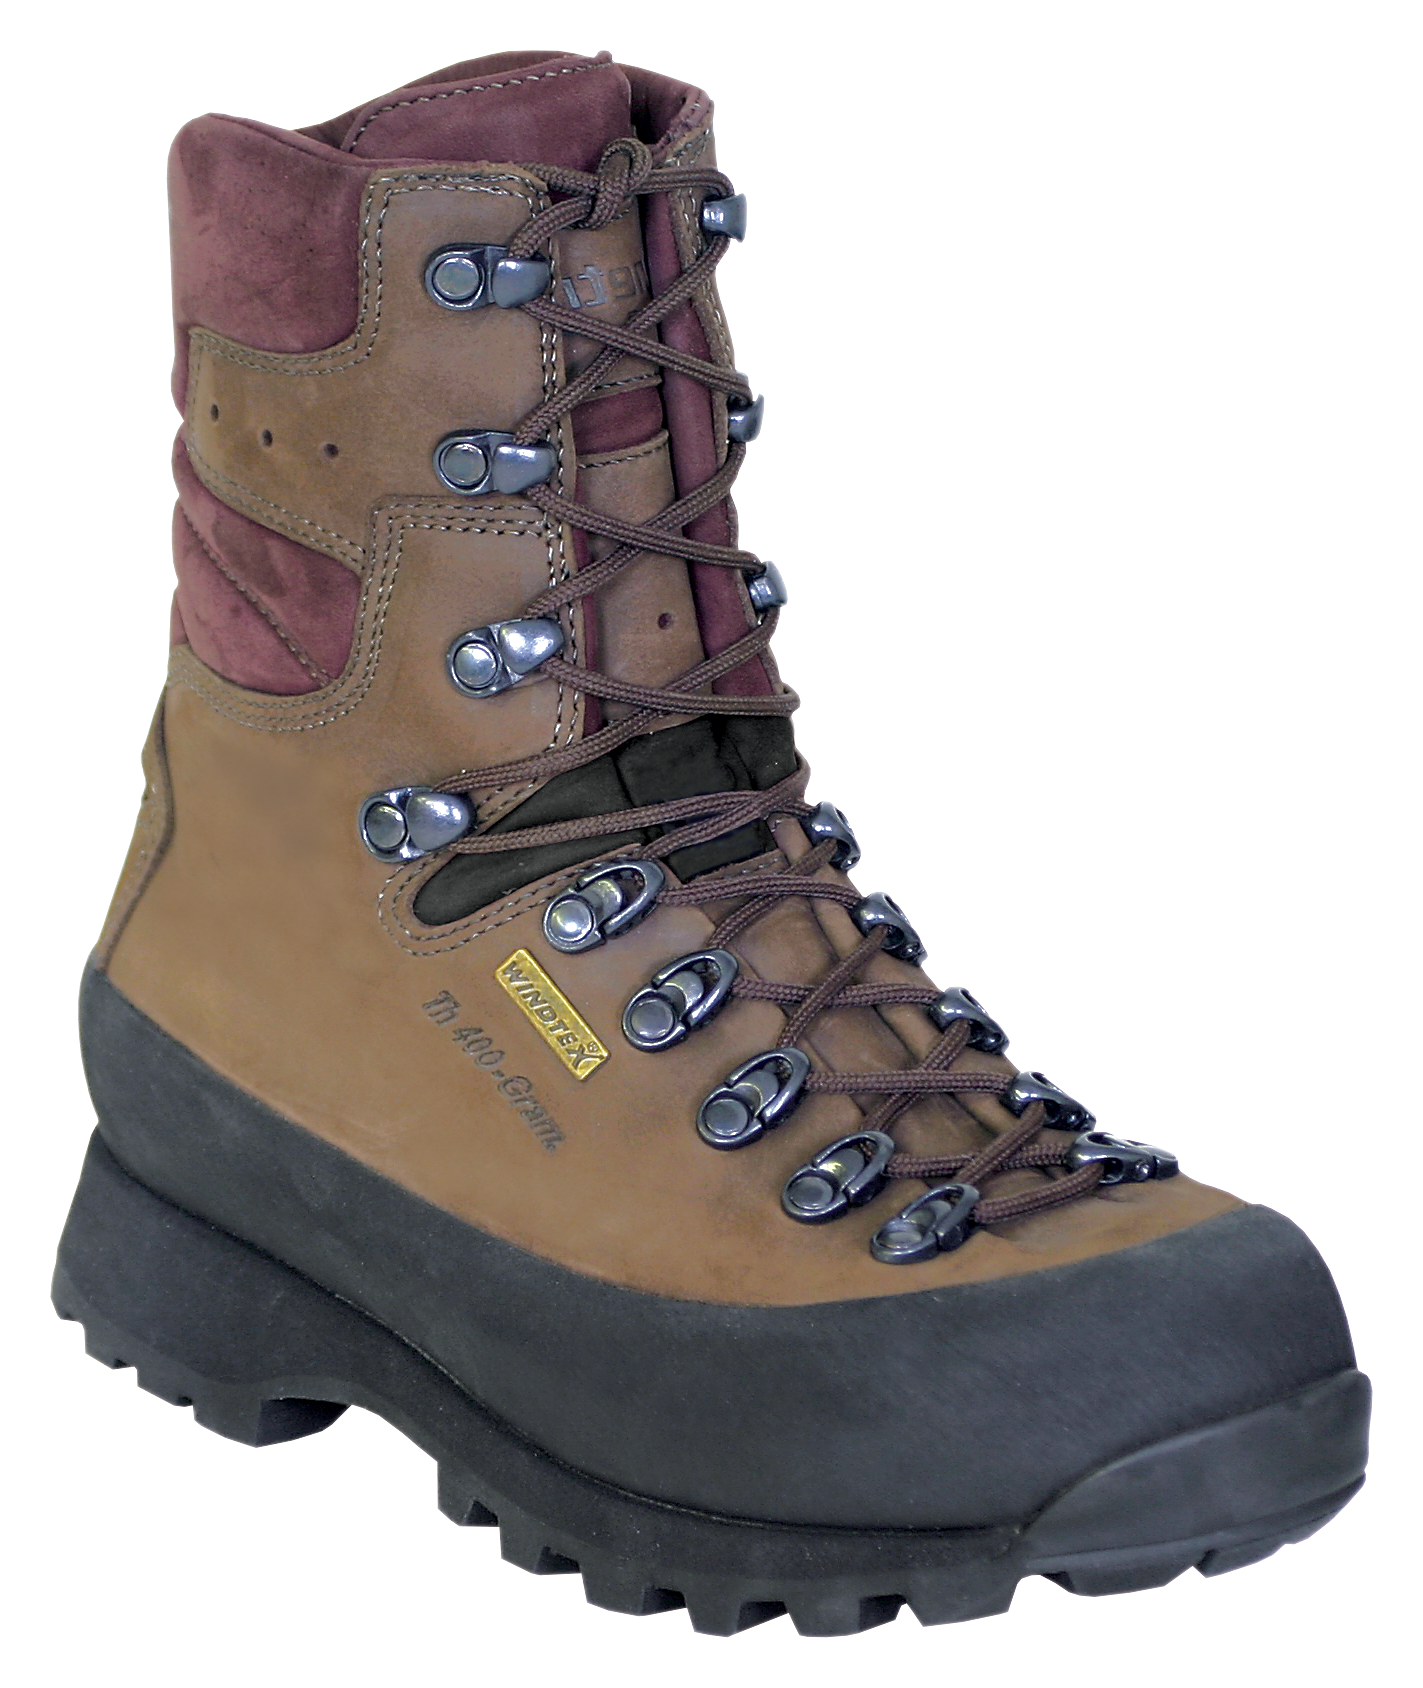 Kenetrek Mountain Extreme 400 Insulated Waterproof Hunting Boots for Ladies - Brown - 7.5M